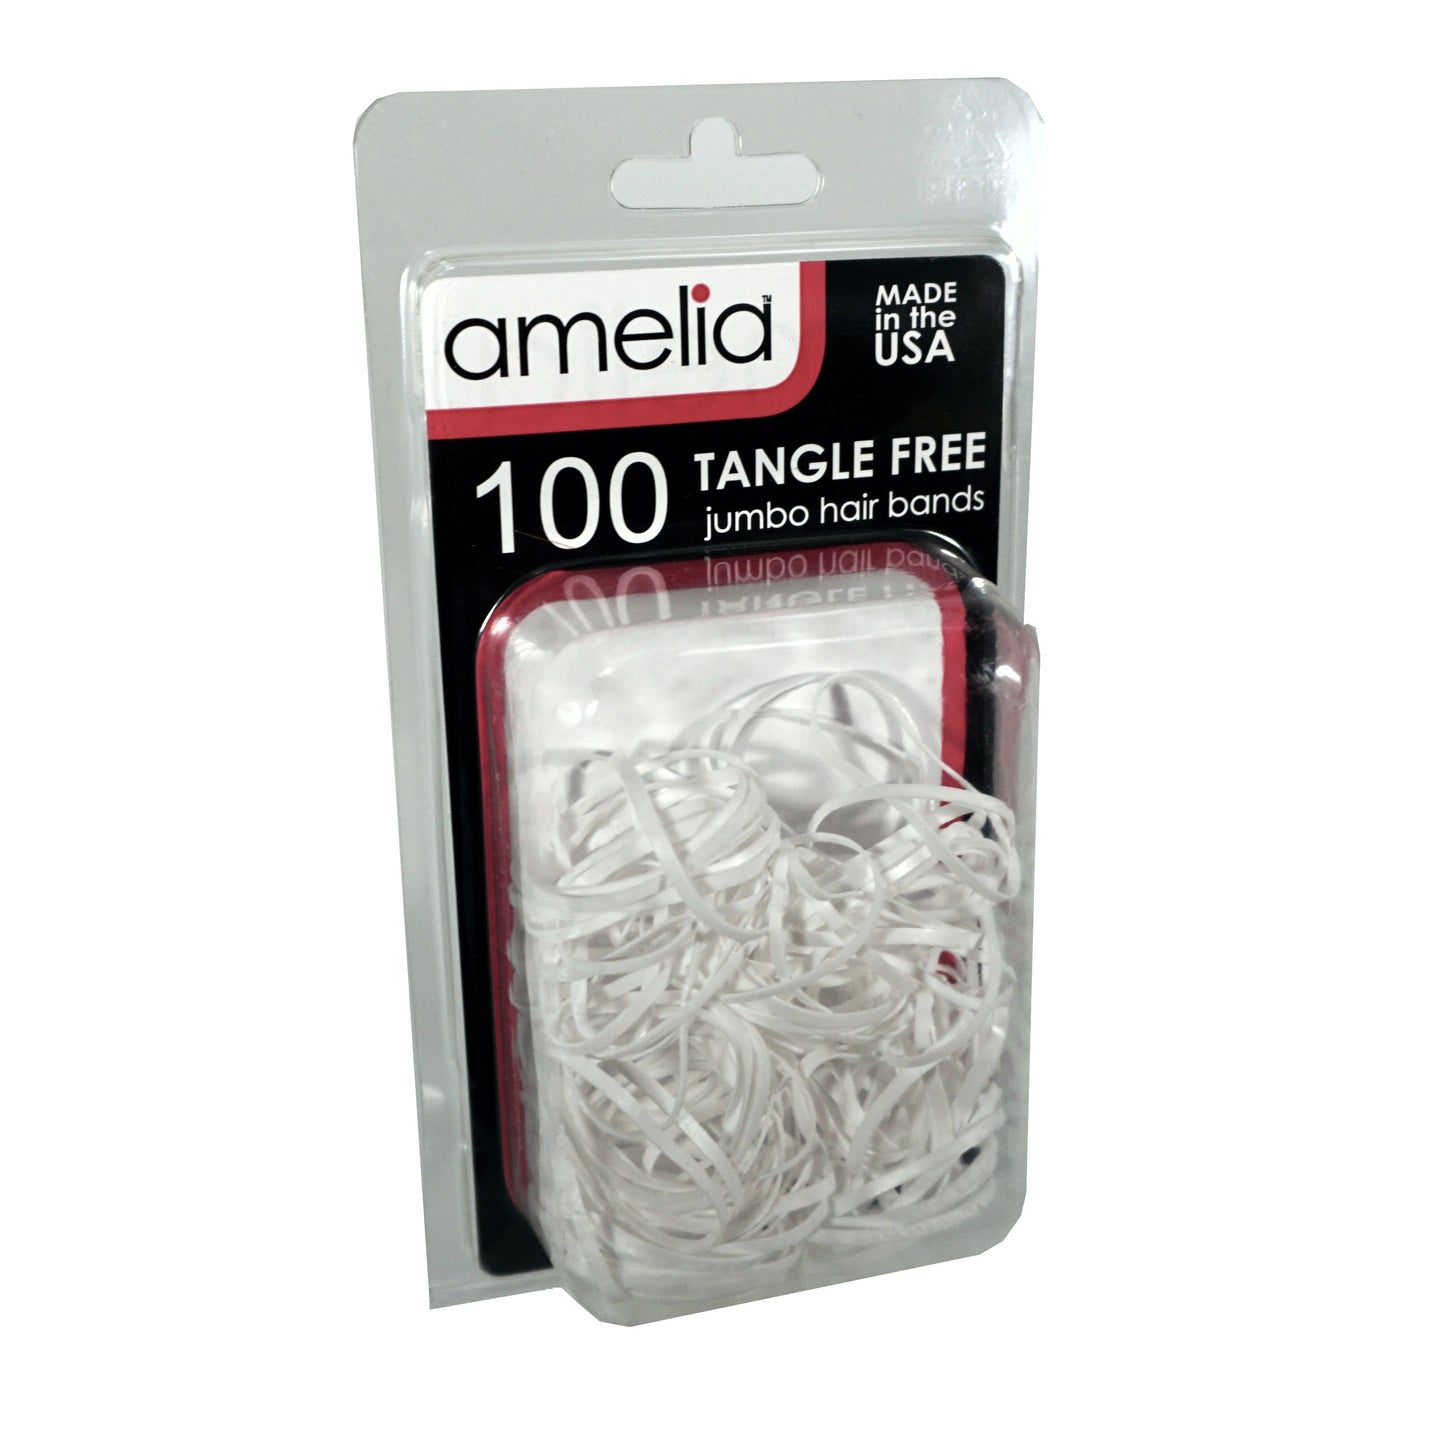 100, White, Jumbo, Tangle Free Bands for Pony Tails and Braids